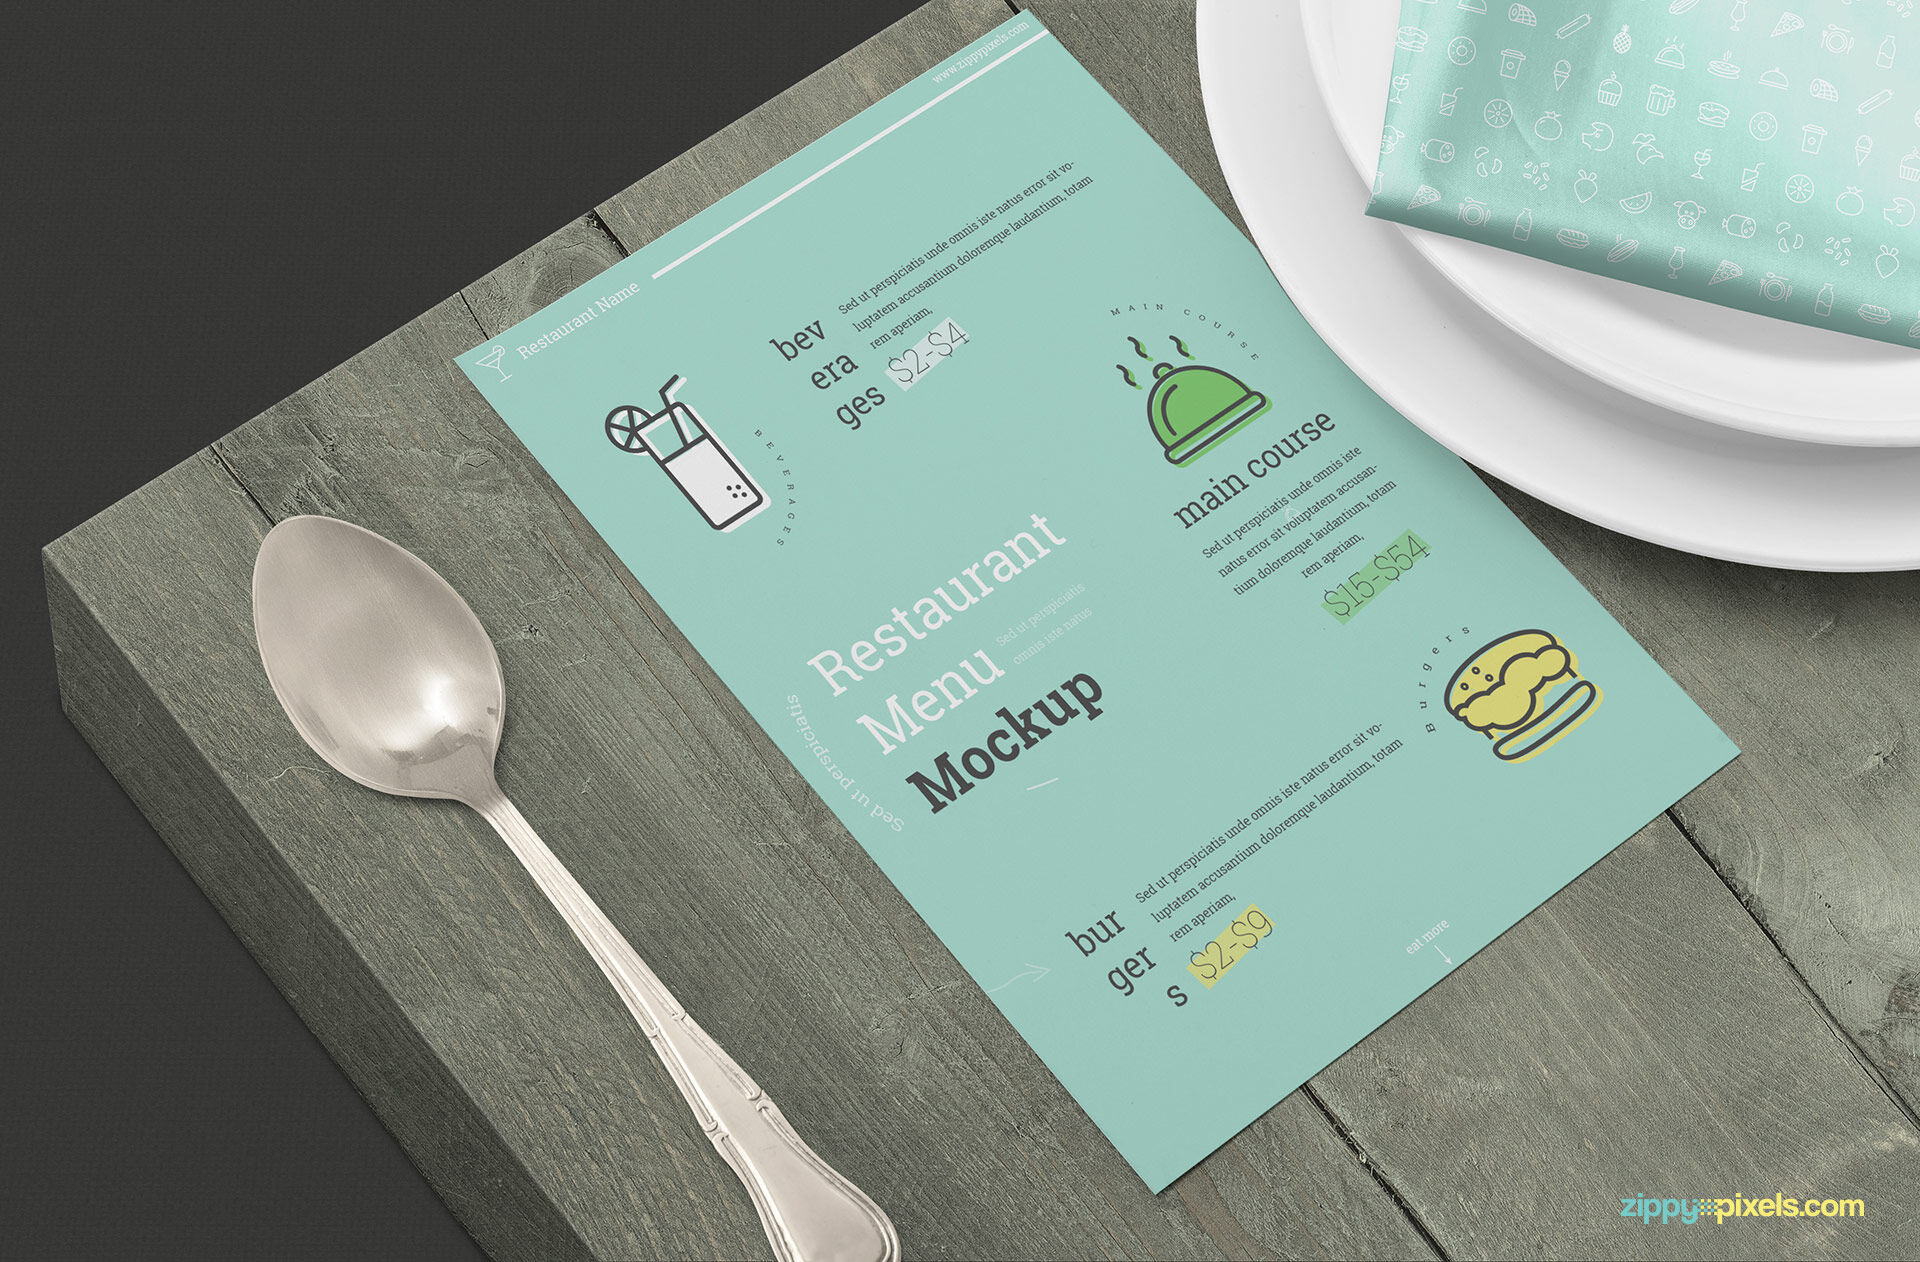 Mockup Featuring Restaurant Menu and Folded Napkin in Plates FREE PSD